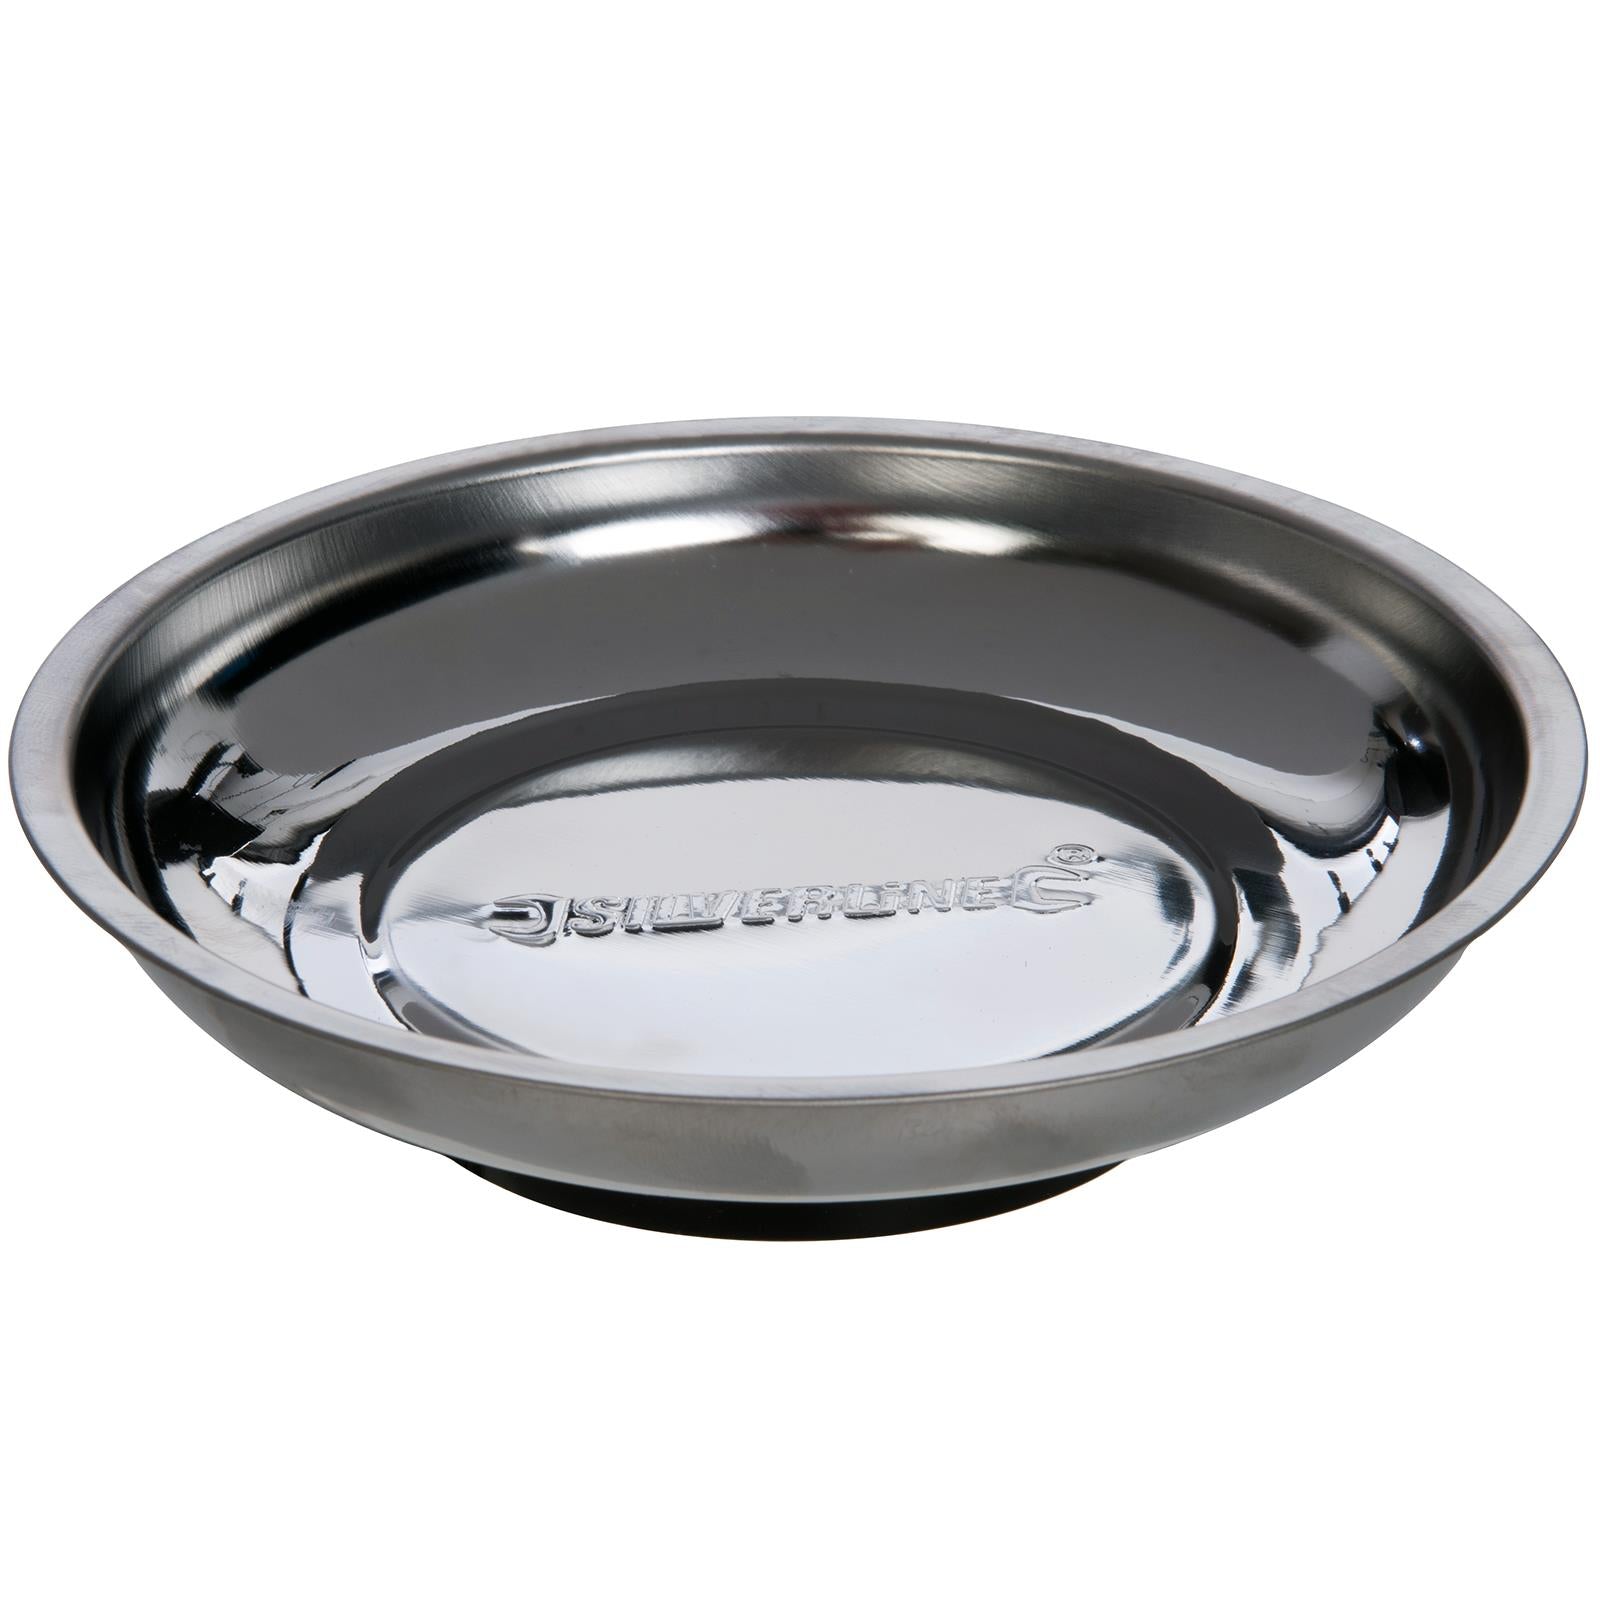 Silverline 150mm Magnetic Parts Dish Storage Stainless Steel Tray